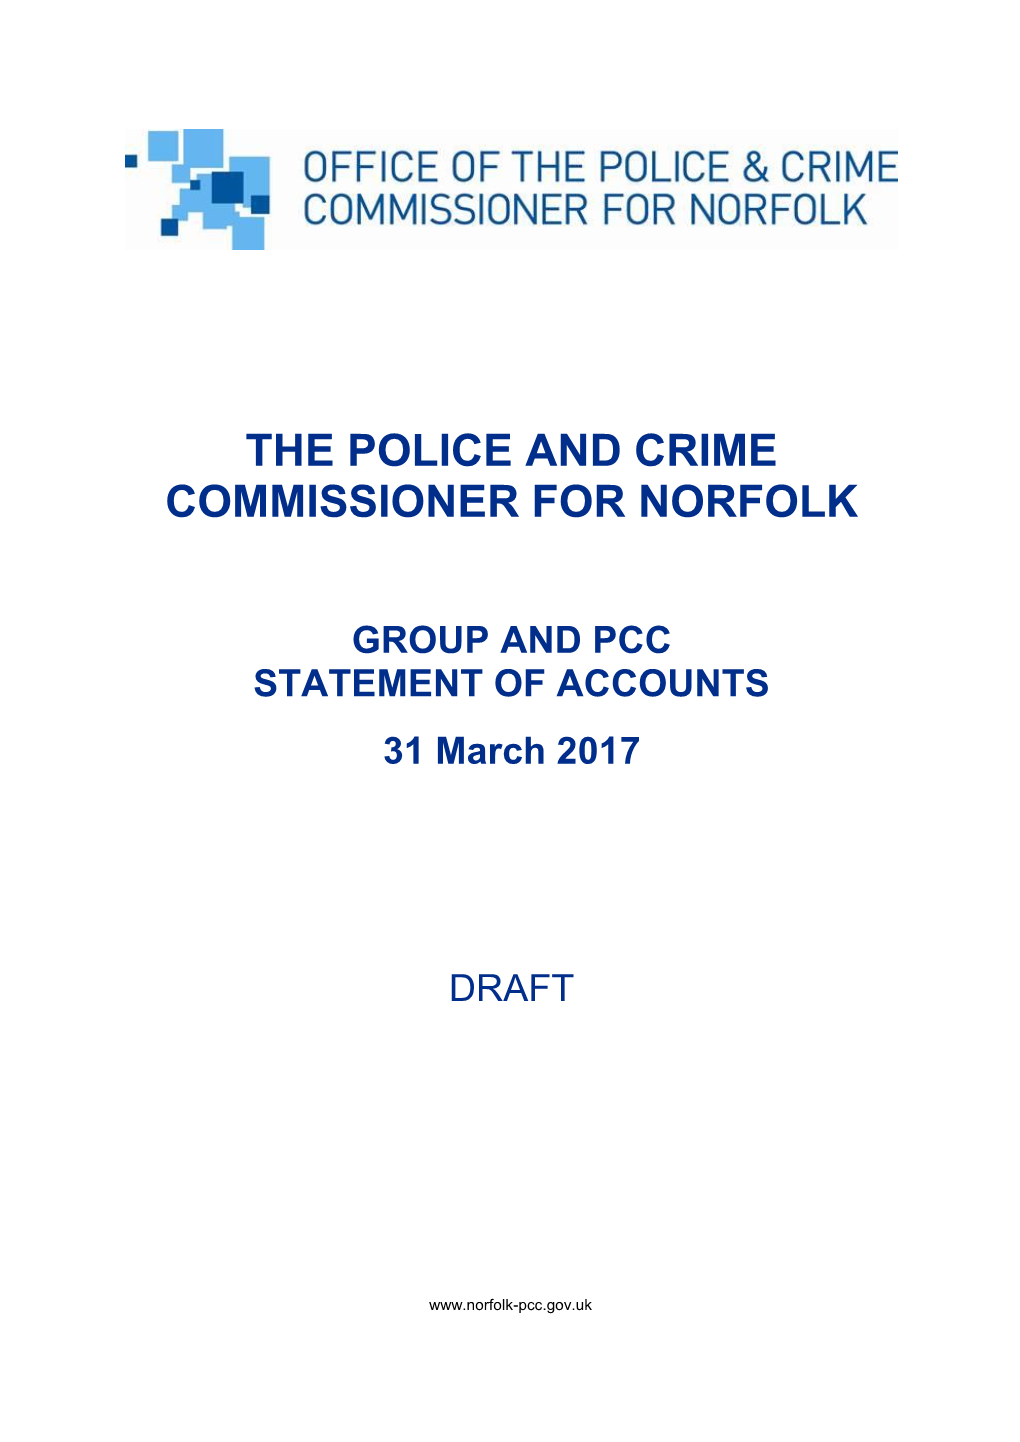 THE POLICE and CRIME COMMISSIONER for NORFOLK GROUP and PCC STATEMENT of ACCOUNTS 31 March 2017